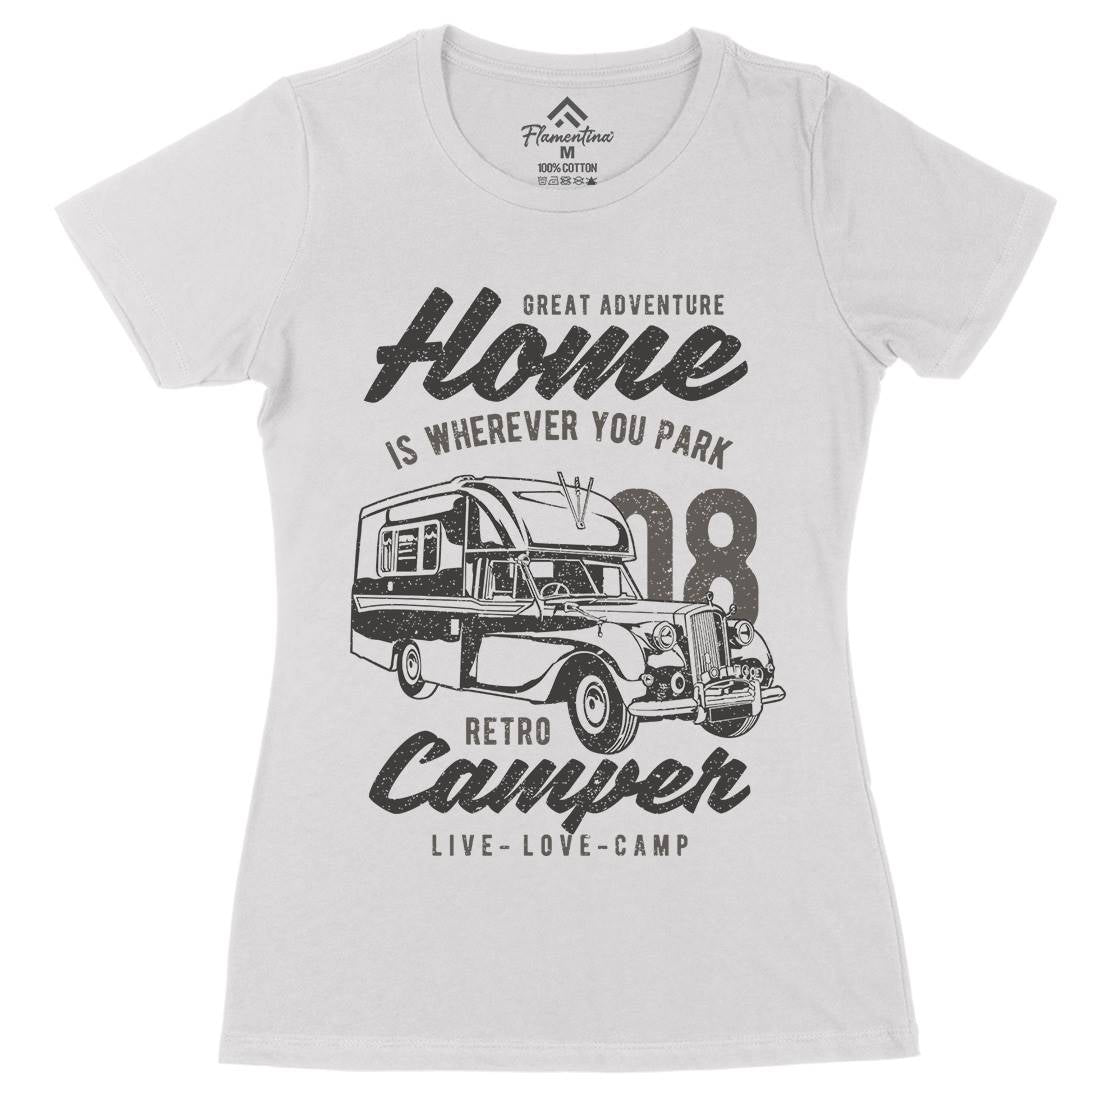 Retro Campers Womens Organic Crew Neck T-Shirt Nature A740